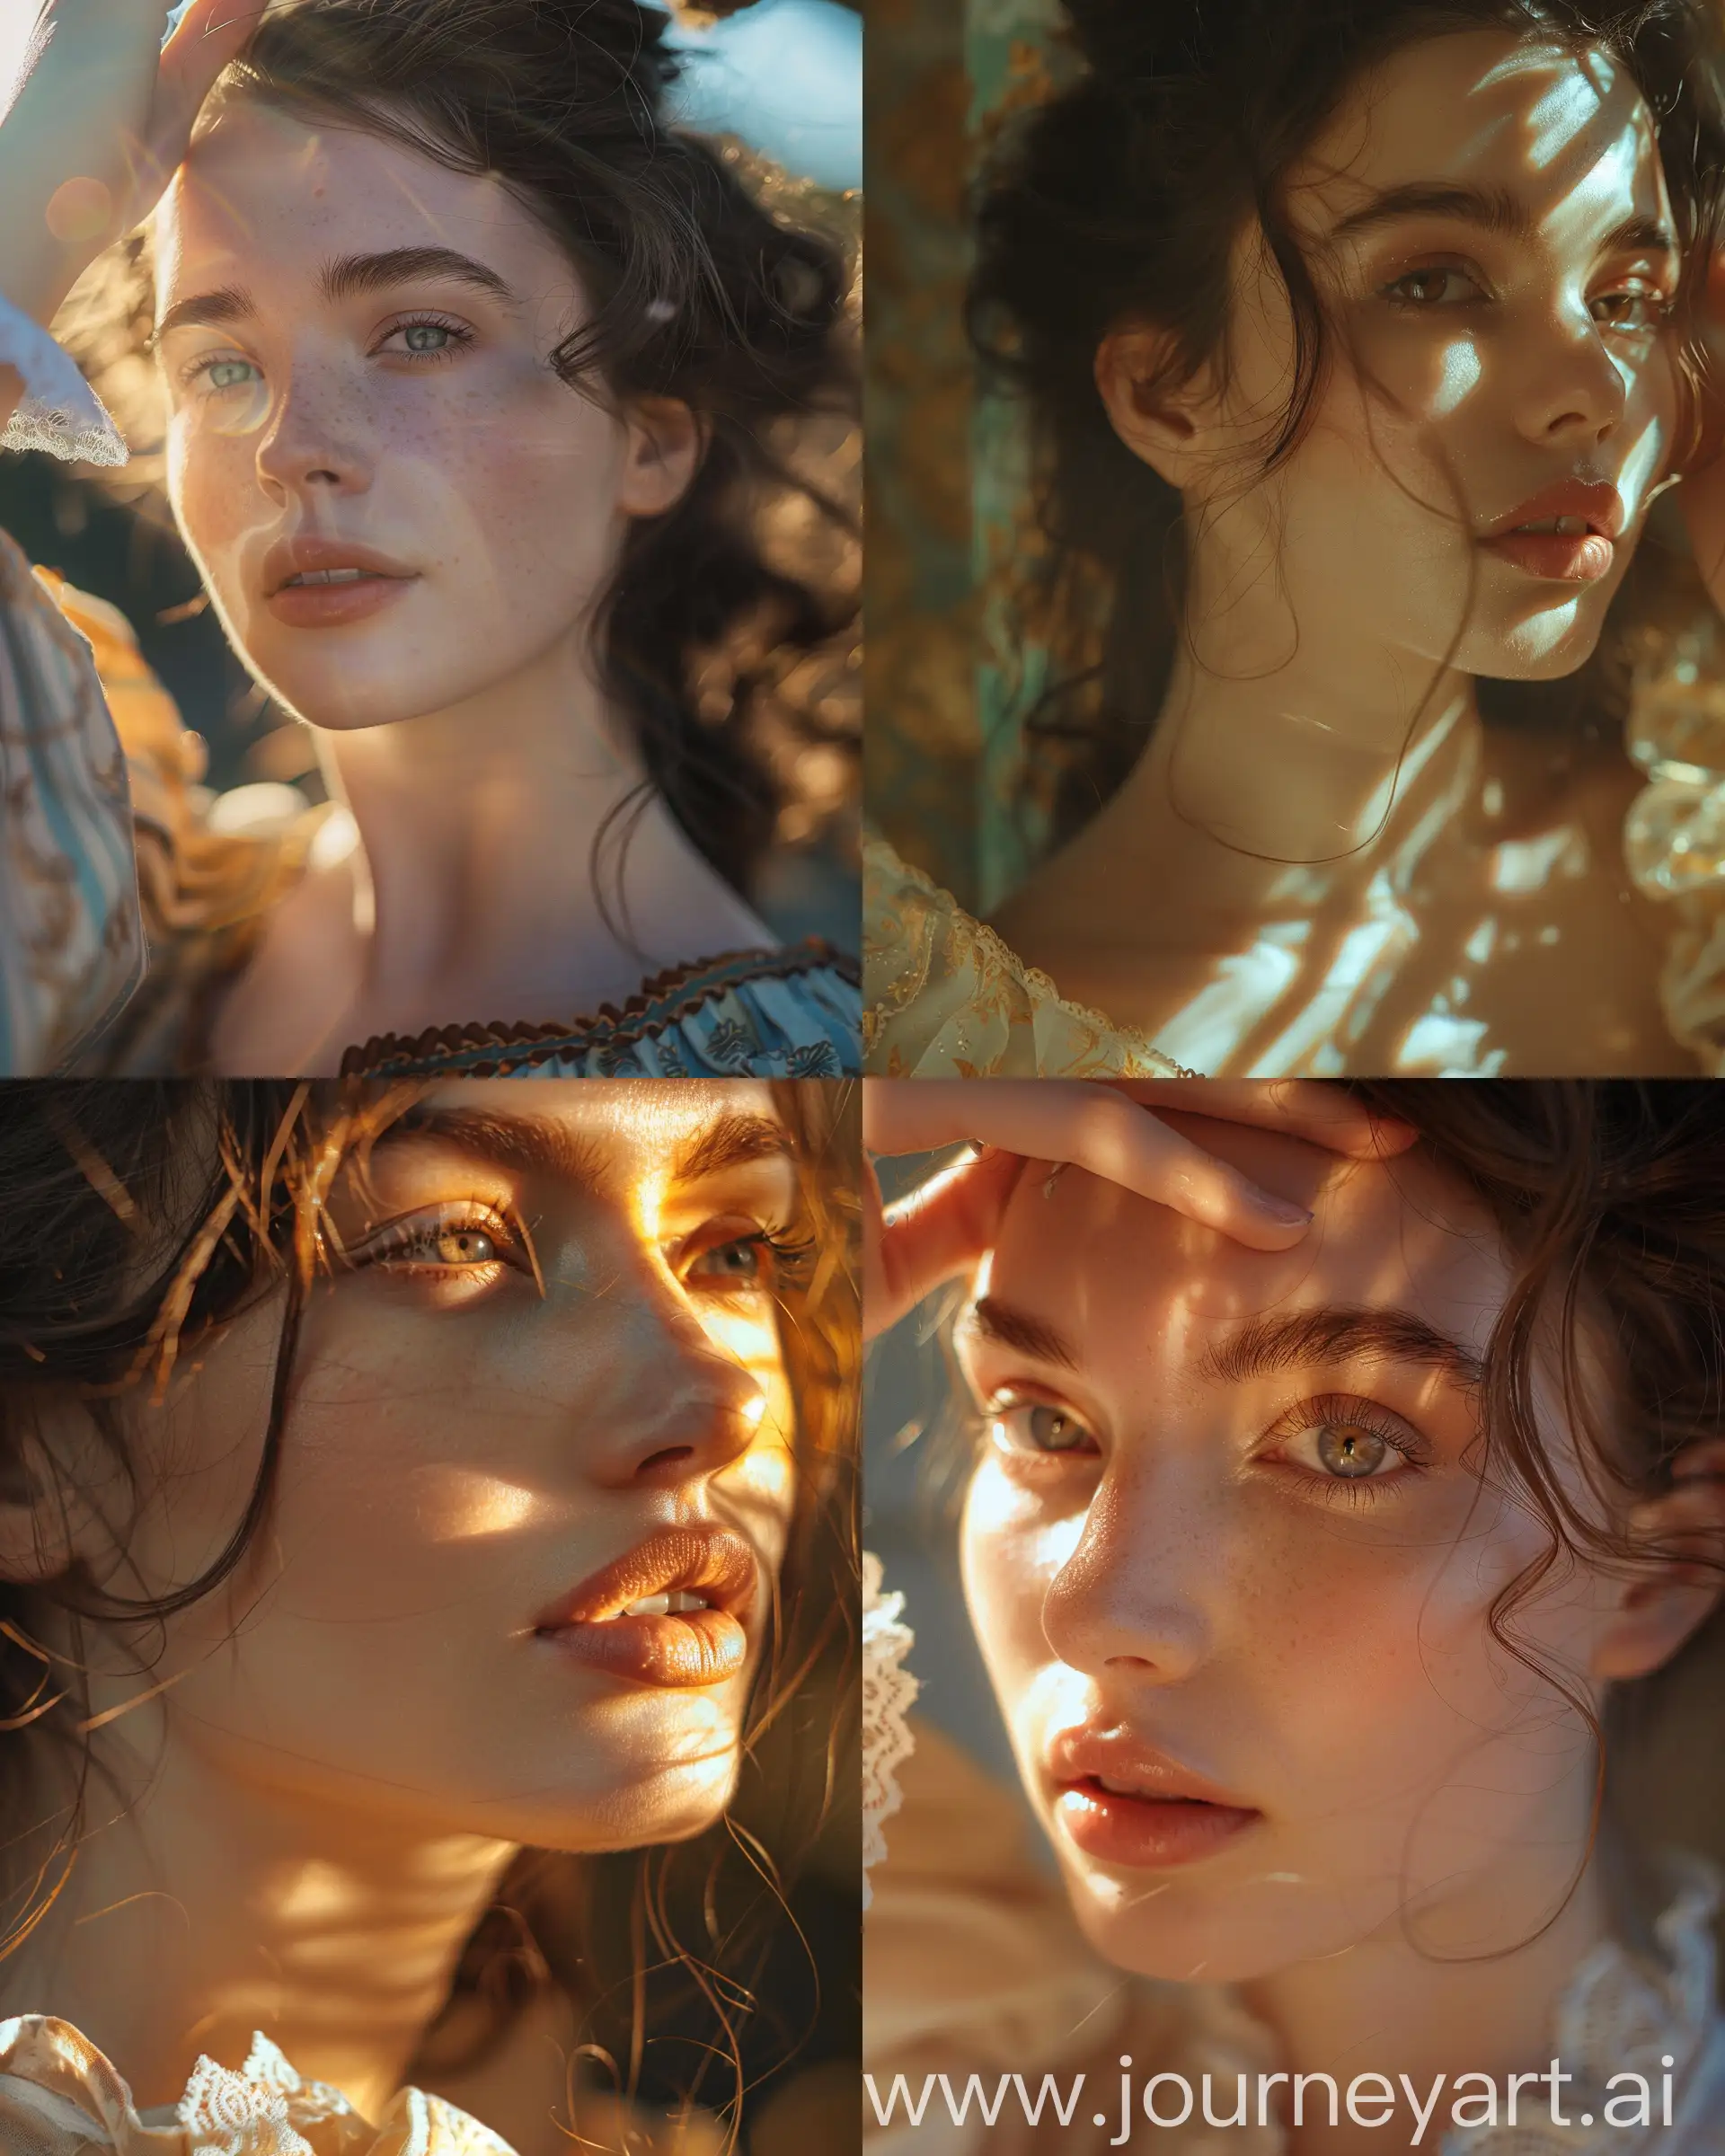 A close-up of a beautiful woman from the 1700s in the morning, sunlight touching her eyes fujifilm gfx 50s --v 6 --ar 16:20 